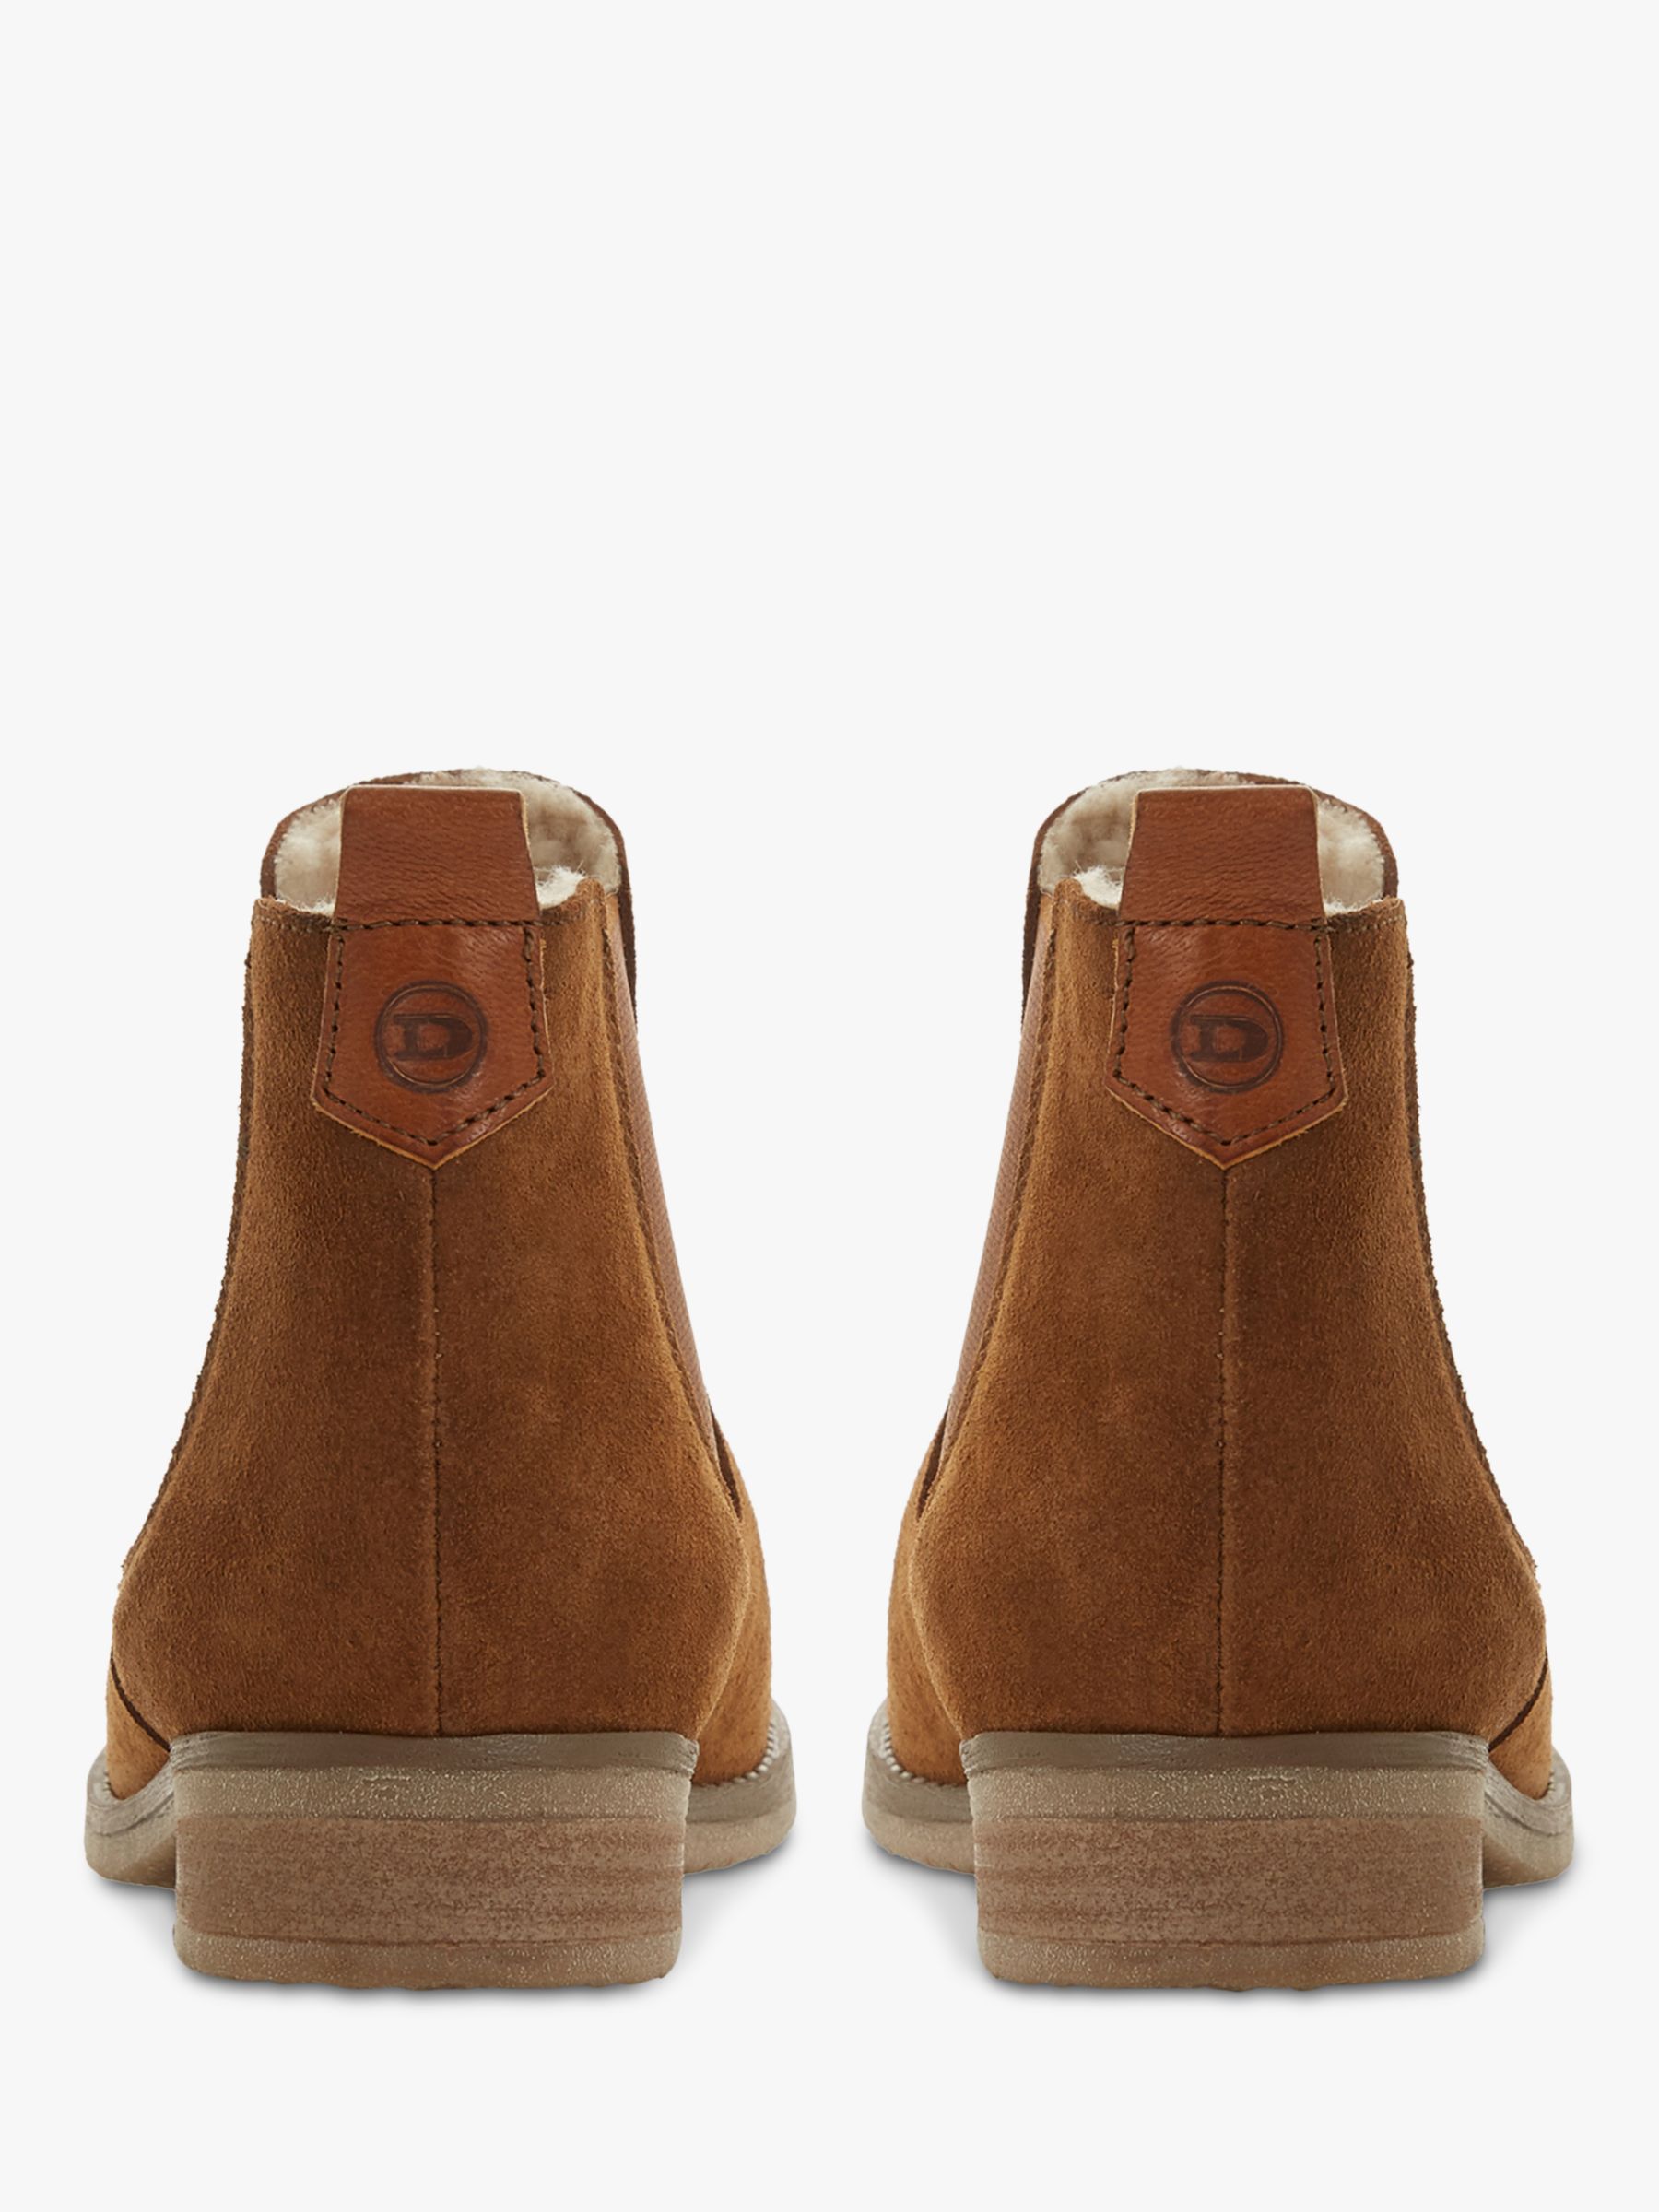 dune prompted chelsea boots